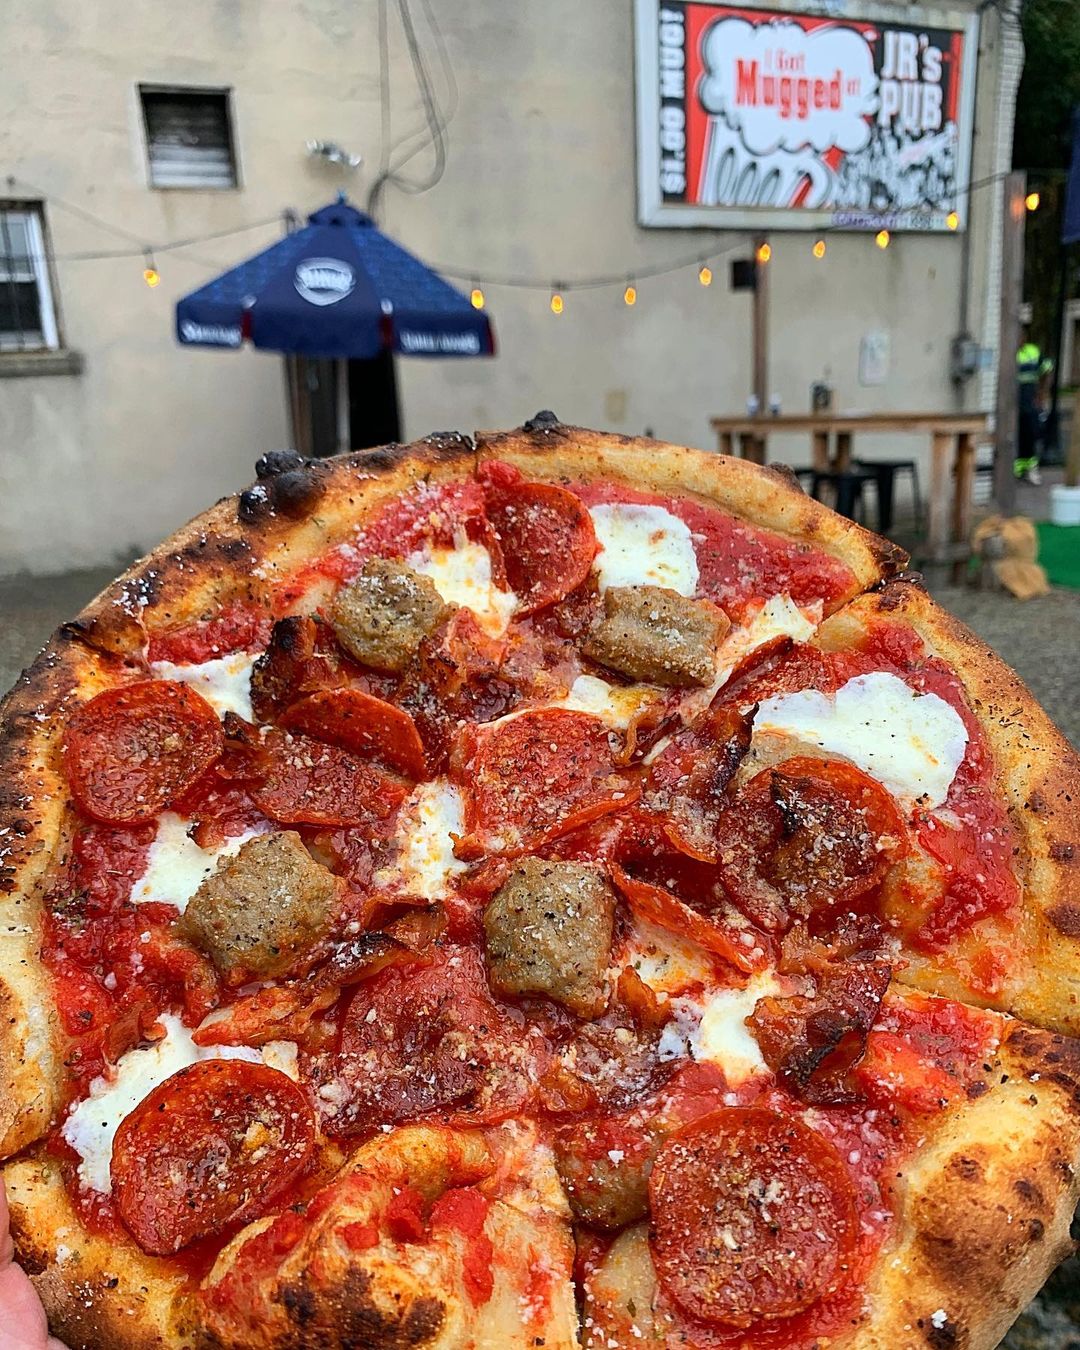 Pepperoni, sausage, and mozzarella wood fired pizza from food truck.